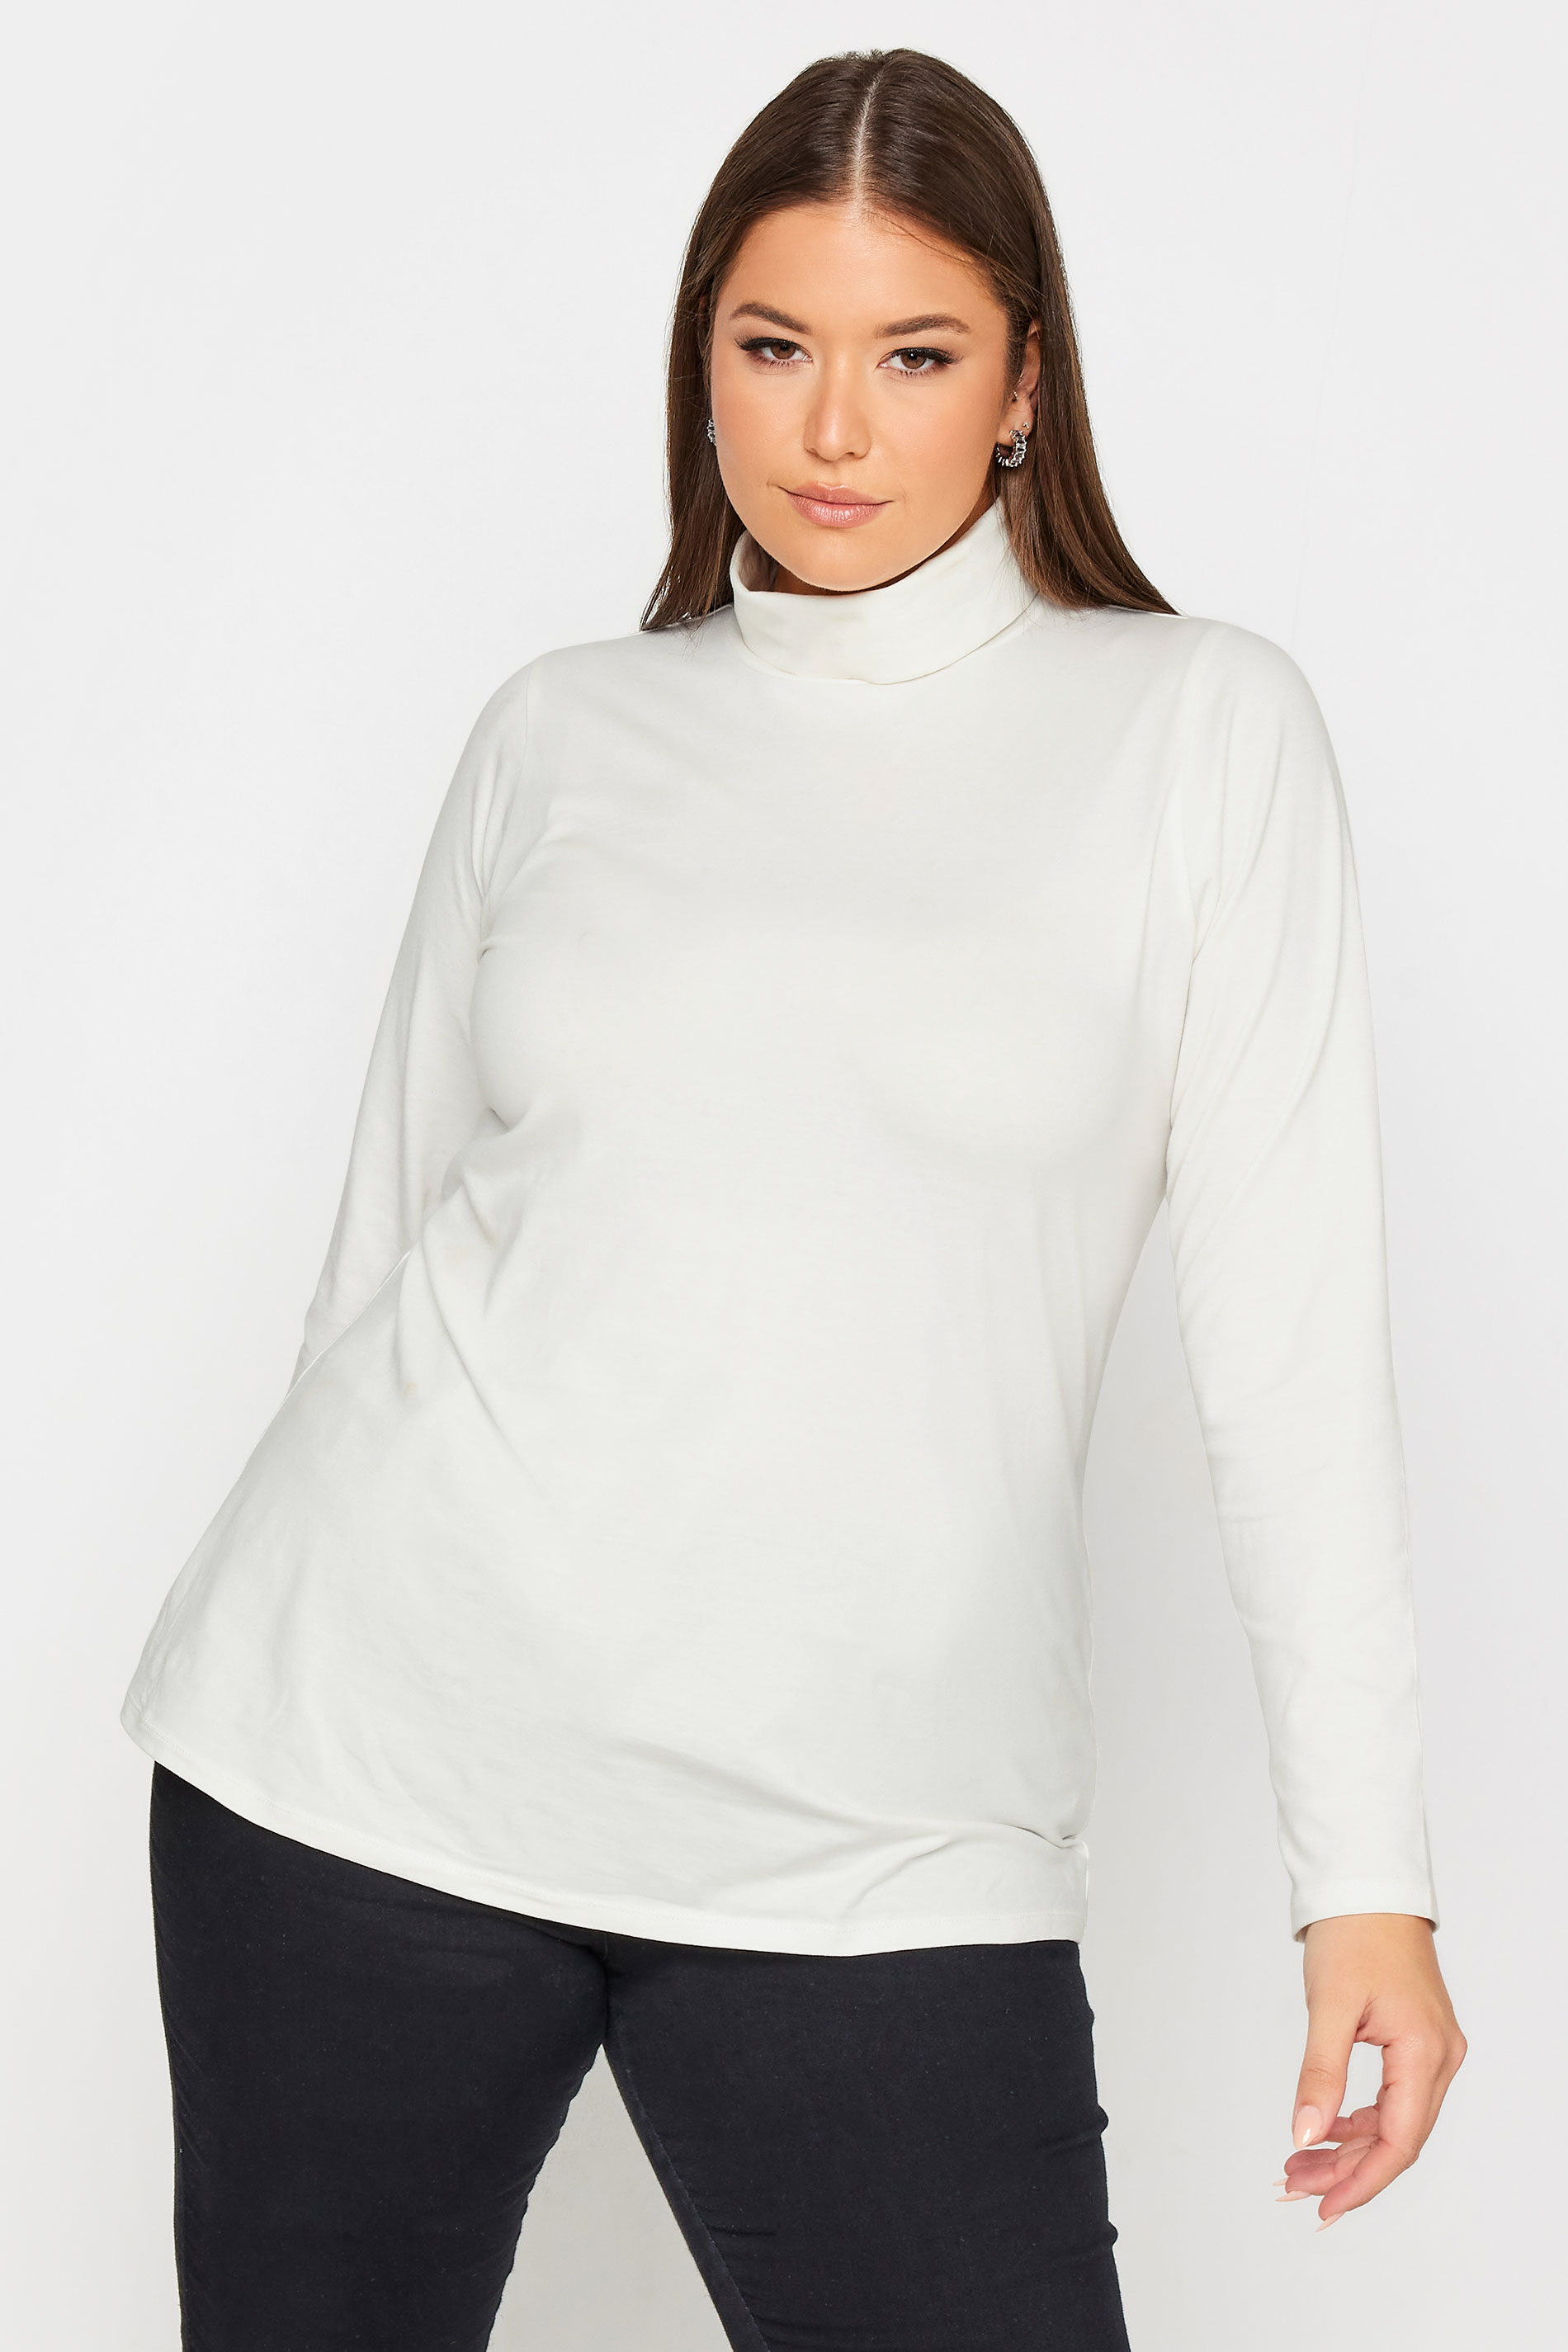 YOURS Plus Size 2 PACK Black & White Long Sleeve Turtle Neck Tops | Yours Clothing 2